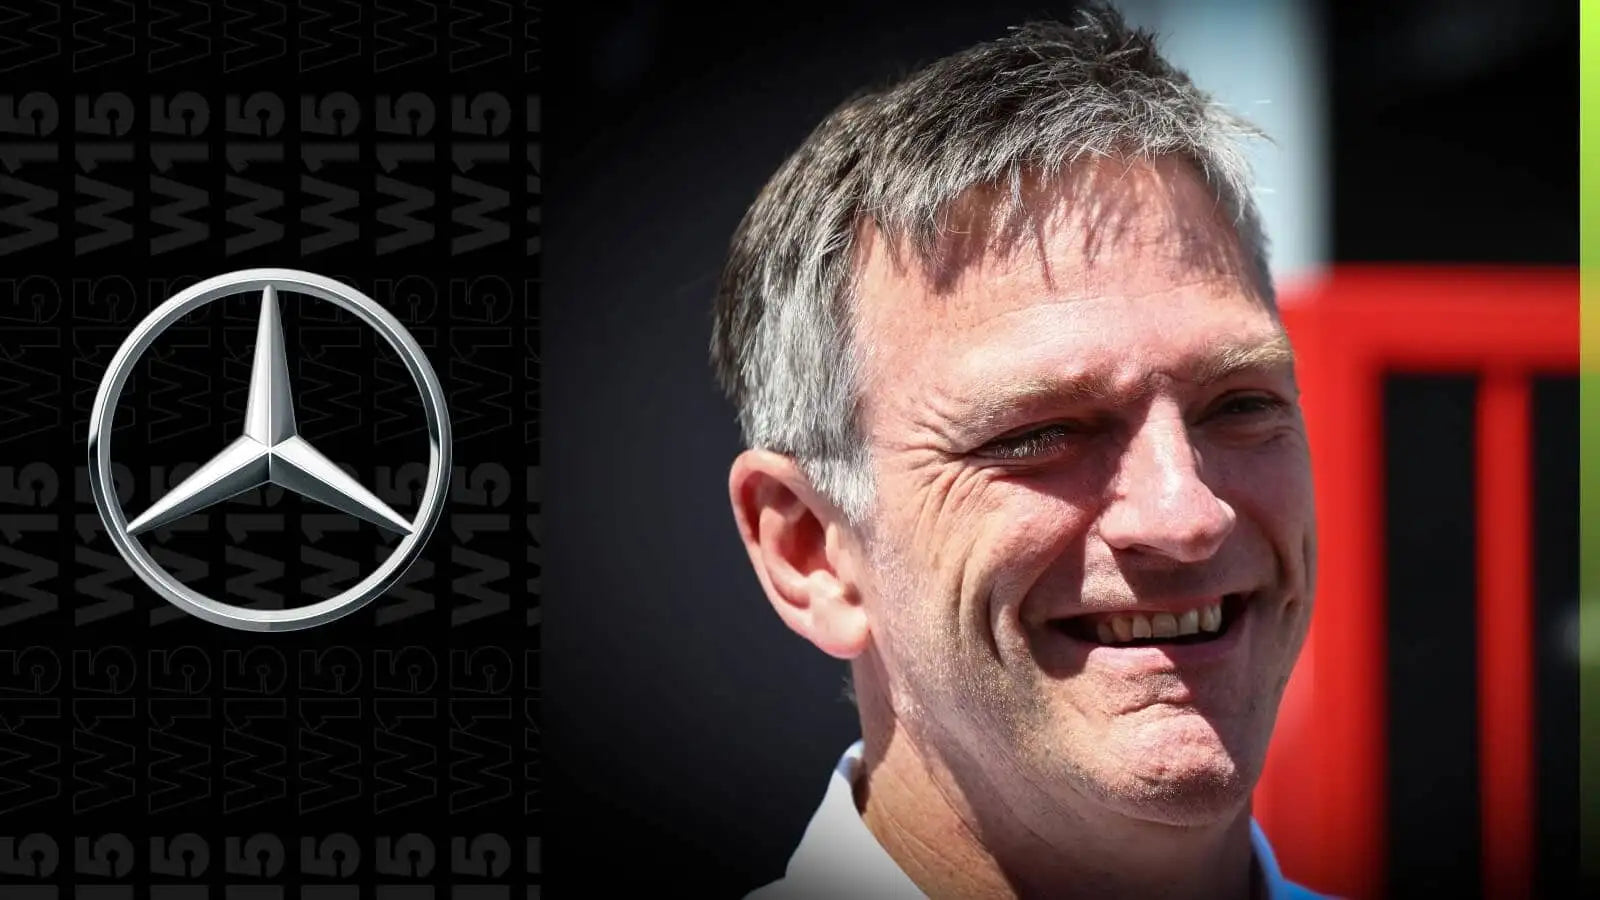 How the Mercedes W15 compares against Ferrari, McLaren with key flaw addressed